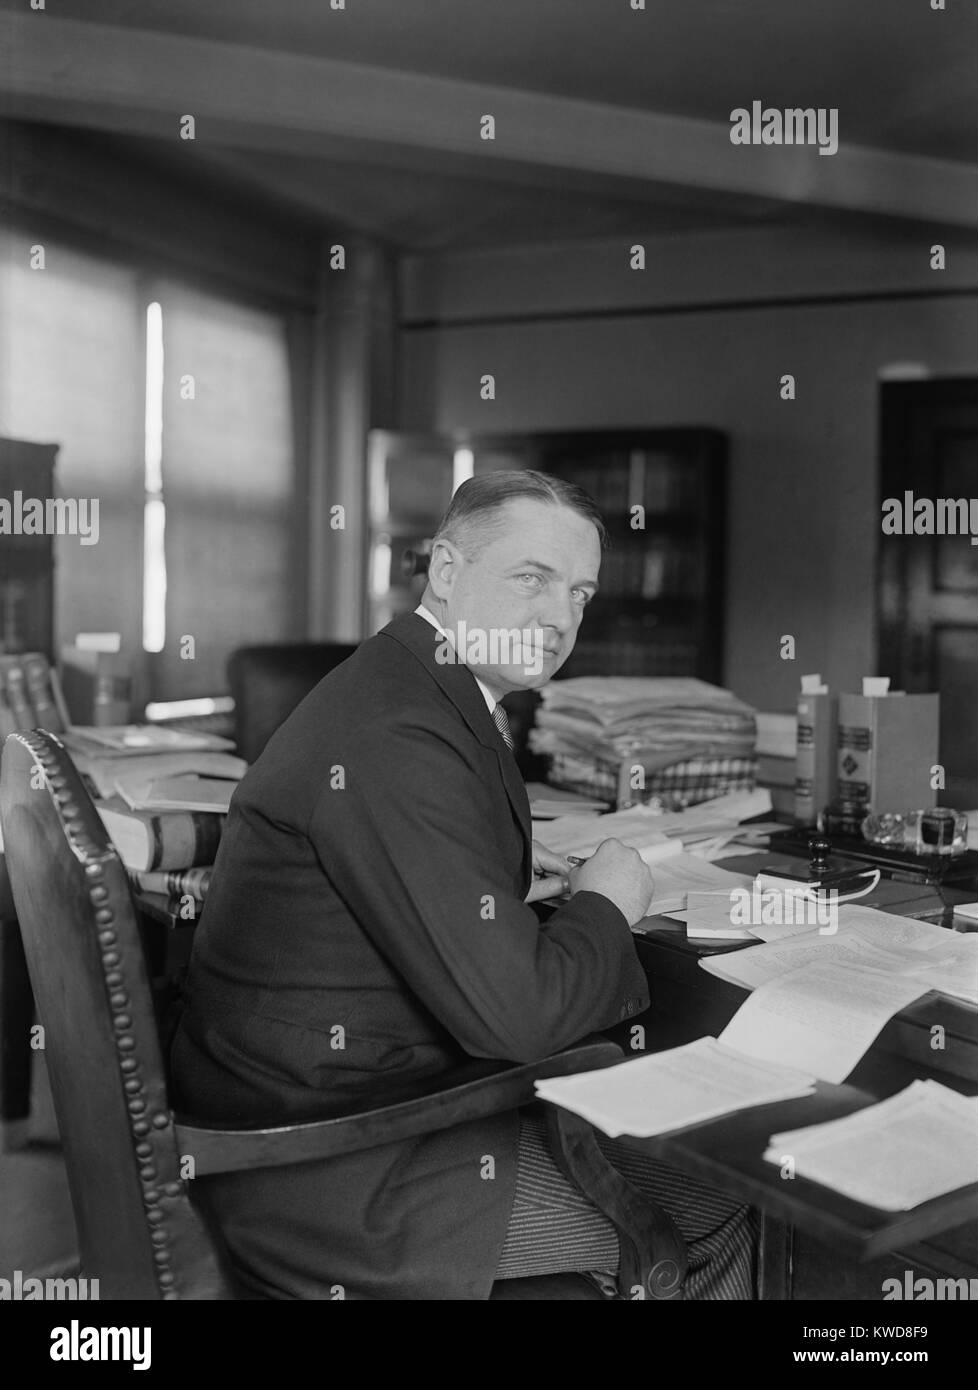 William J. Donovan as Assistant Attorney General, March 19, 1925. He was appointed to the Antitrust Division by President Calvin Coolidge. He is best known for his World War 2 leadership of Office of Strategic Services (OSS), the precursor to the Central Intelligence Agency (CIA). (BSLOC 2015 16 108) Stock Photo